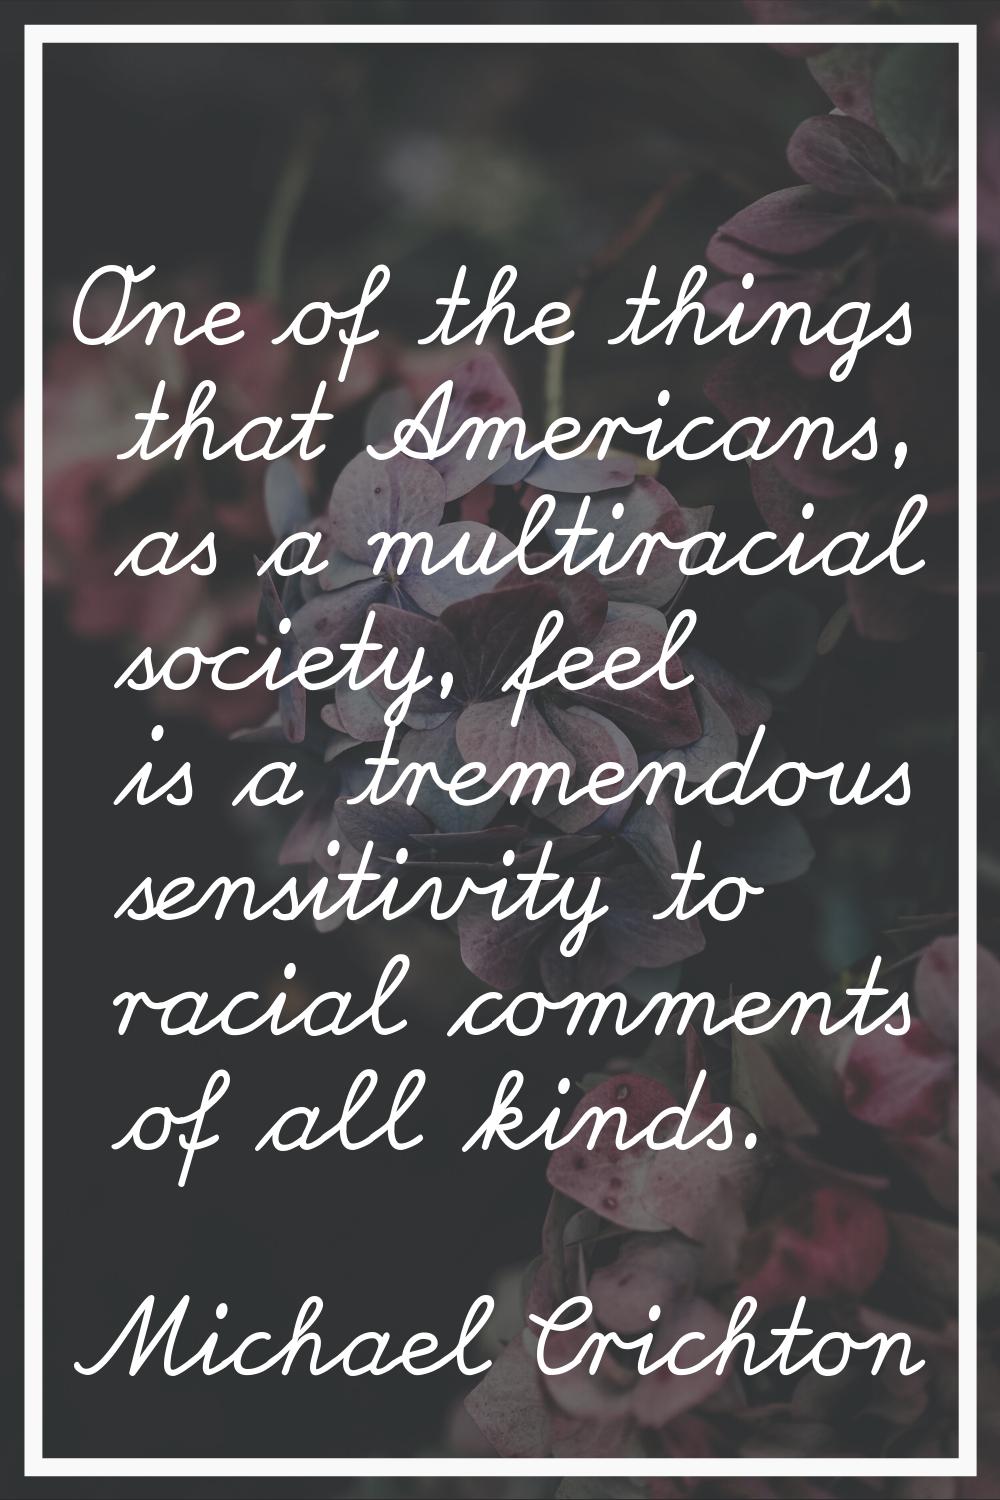 One of the things that Americans, as a multiracial society, feel is a tremendous sensitivity to rac